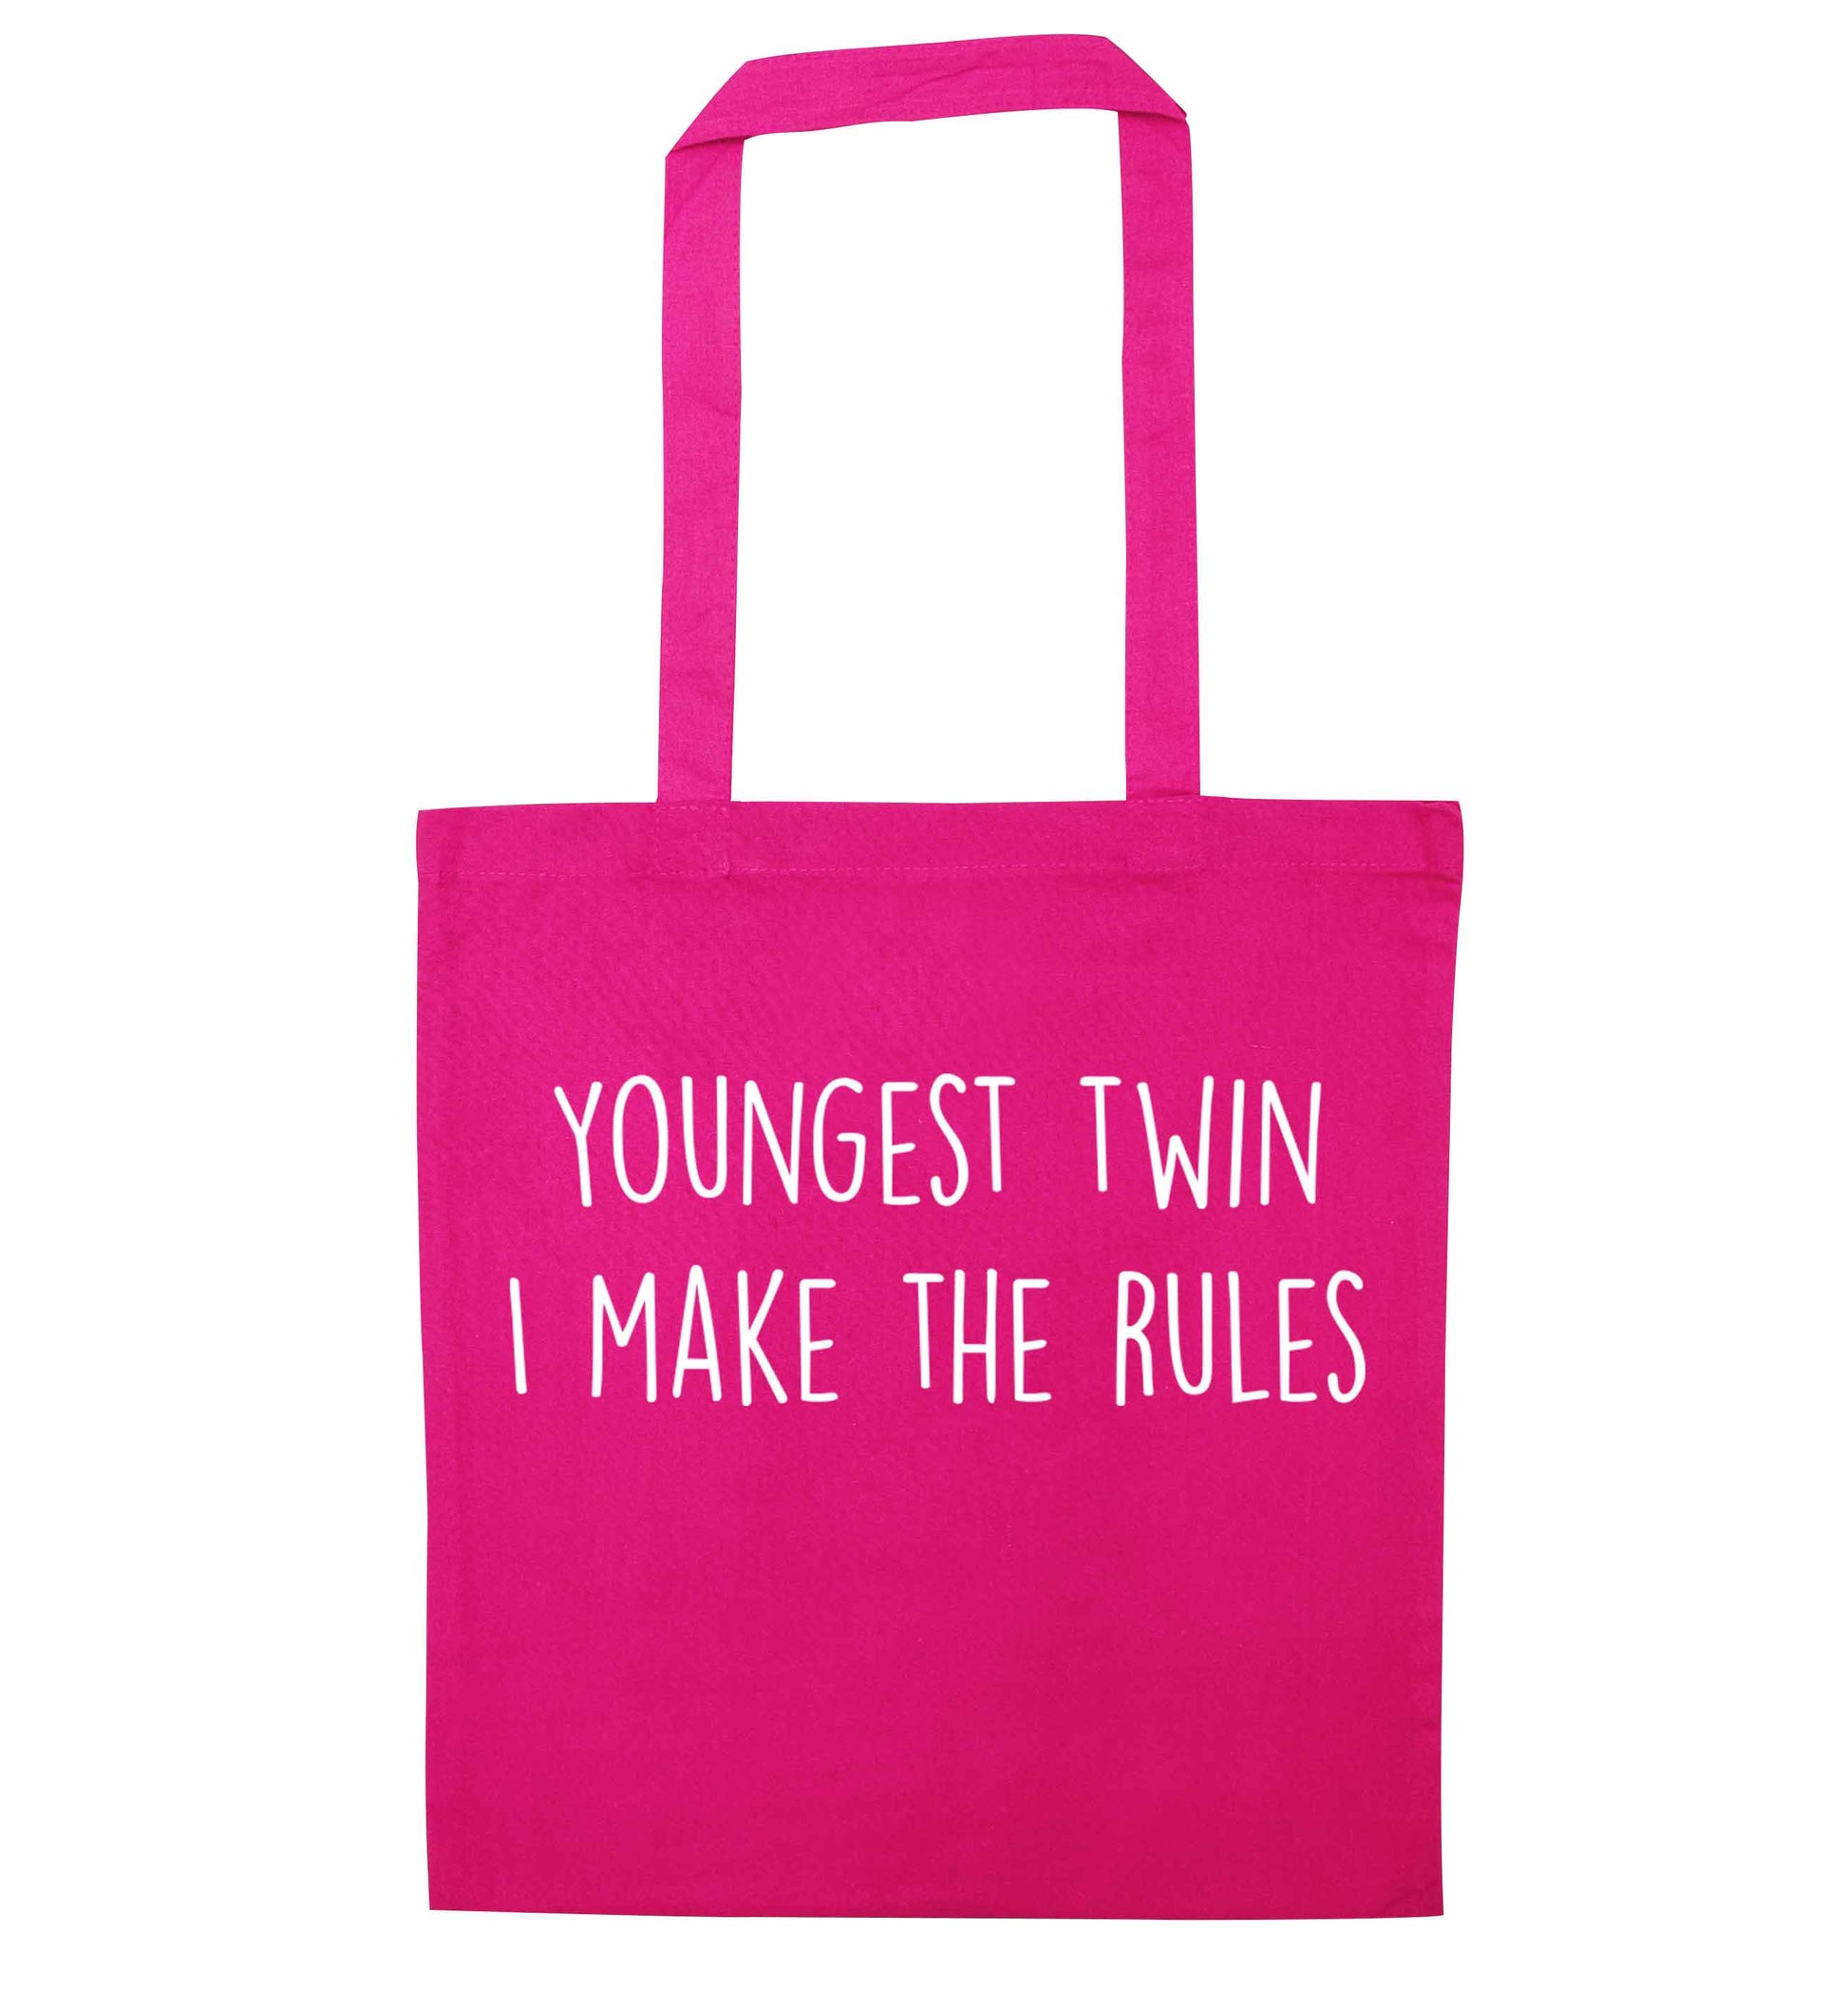 Youngest twin I make the rules pink tote bag